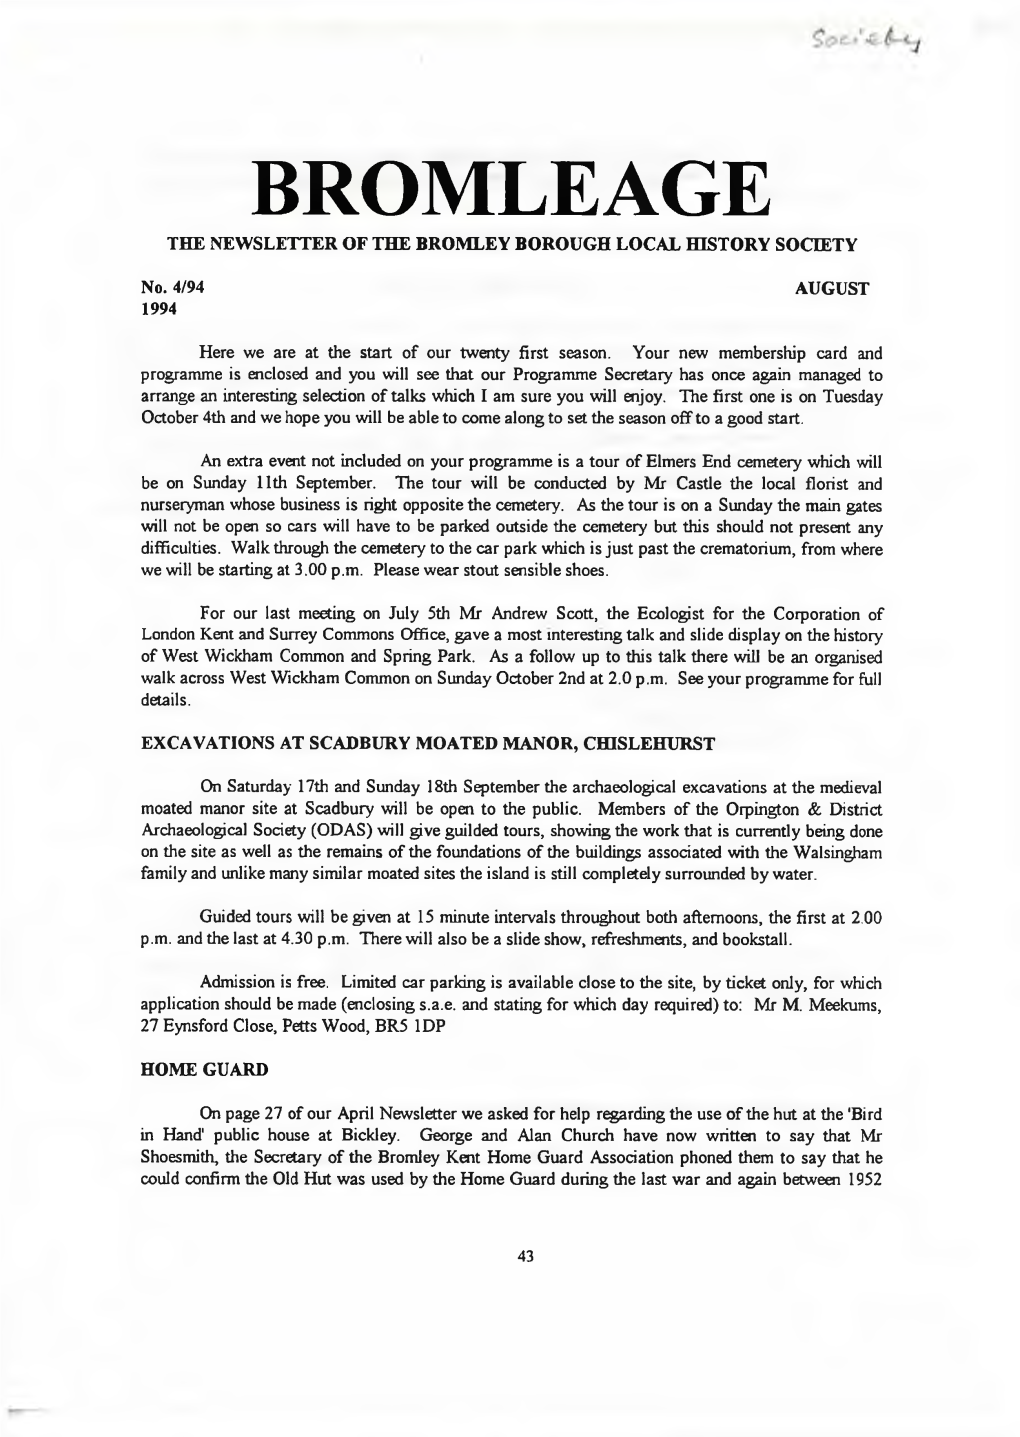 Bromleage the Newsletter of the Bromley Borough Local History Society